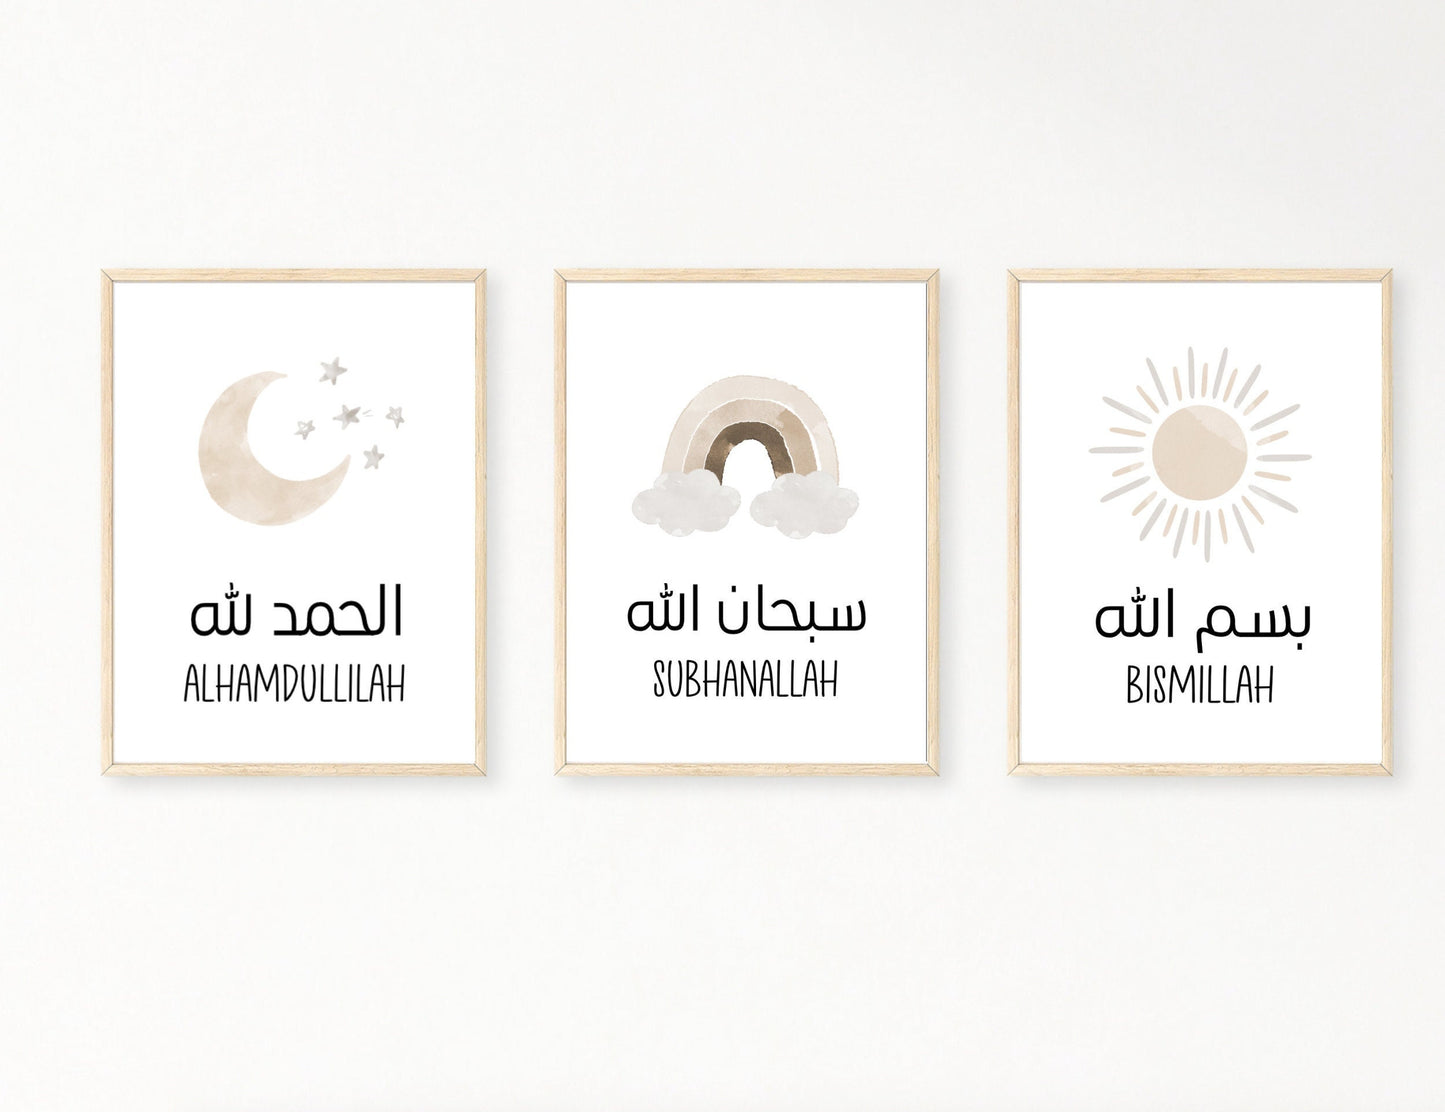 An image showing three graphics. The first one shows a light brown crescent with tiny stars, and the word Alhamdulillah in both Arabic and English written just below it. The middle one shows a light brown rainbow with the word Subhanallah written in both Arabic and English right below it. The last graphic is of a unique light brown sun with the words Bismillah written in both Arabic and English. 